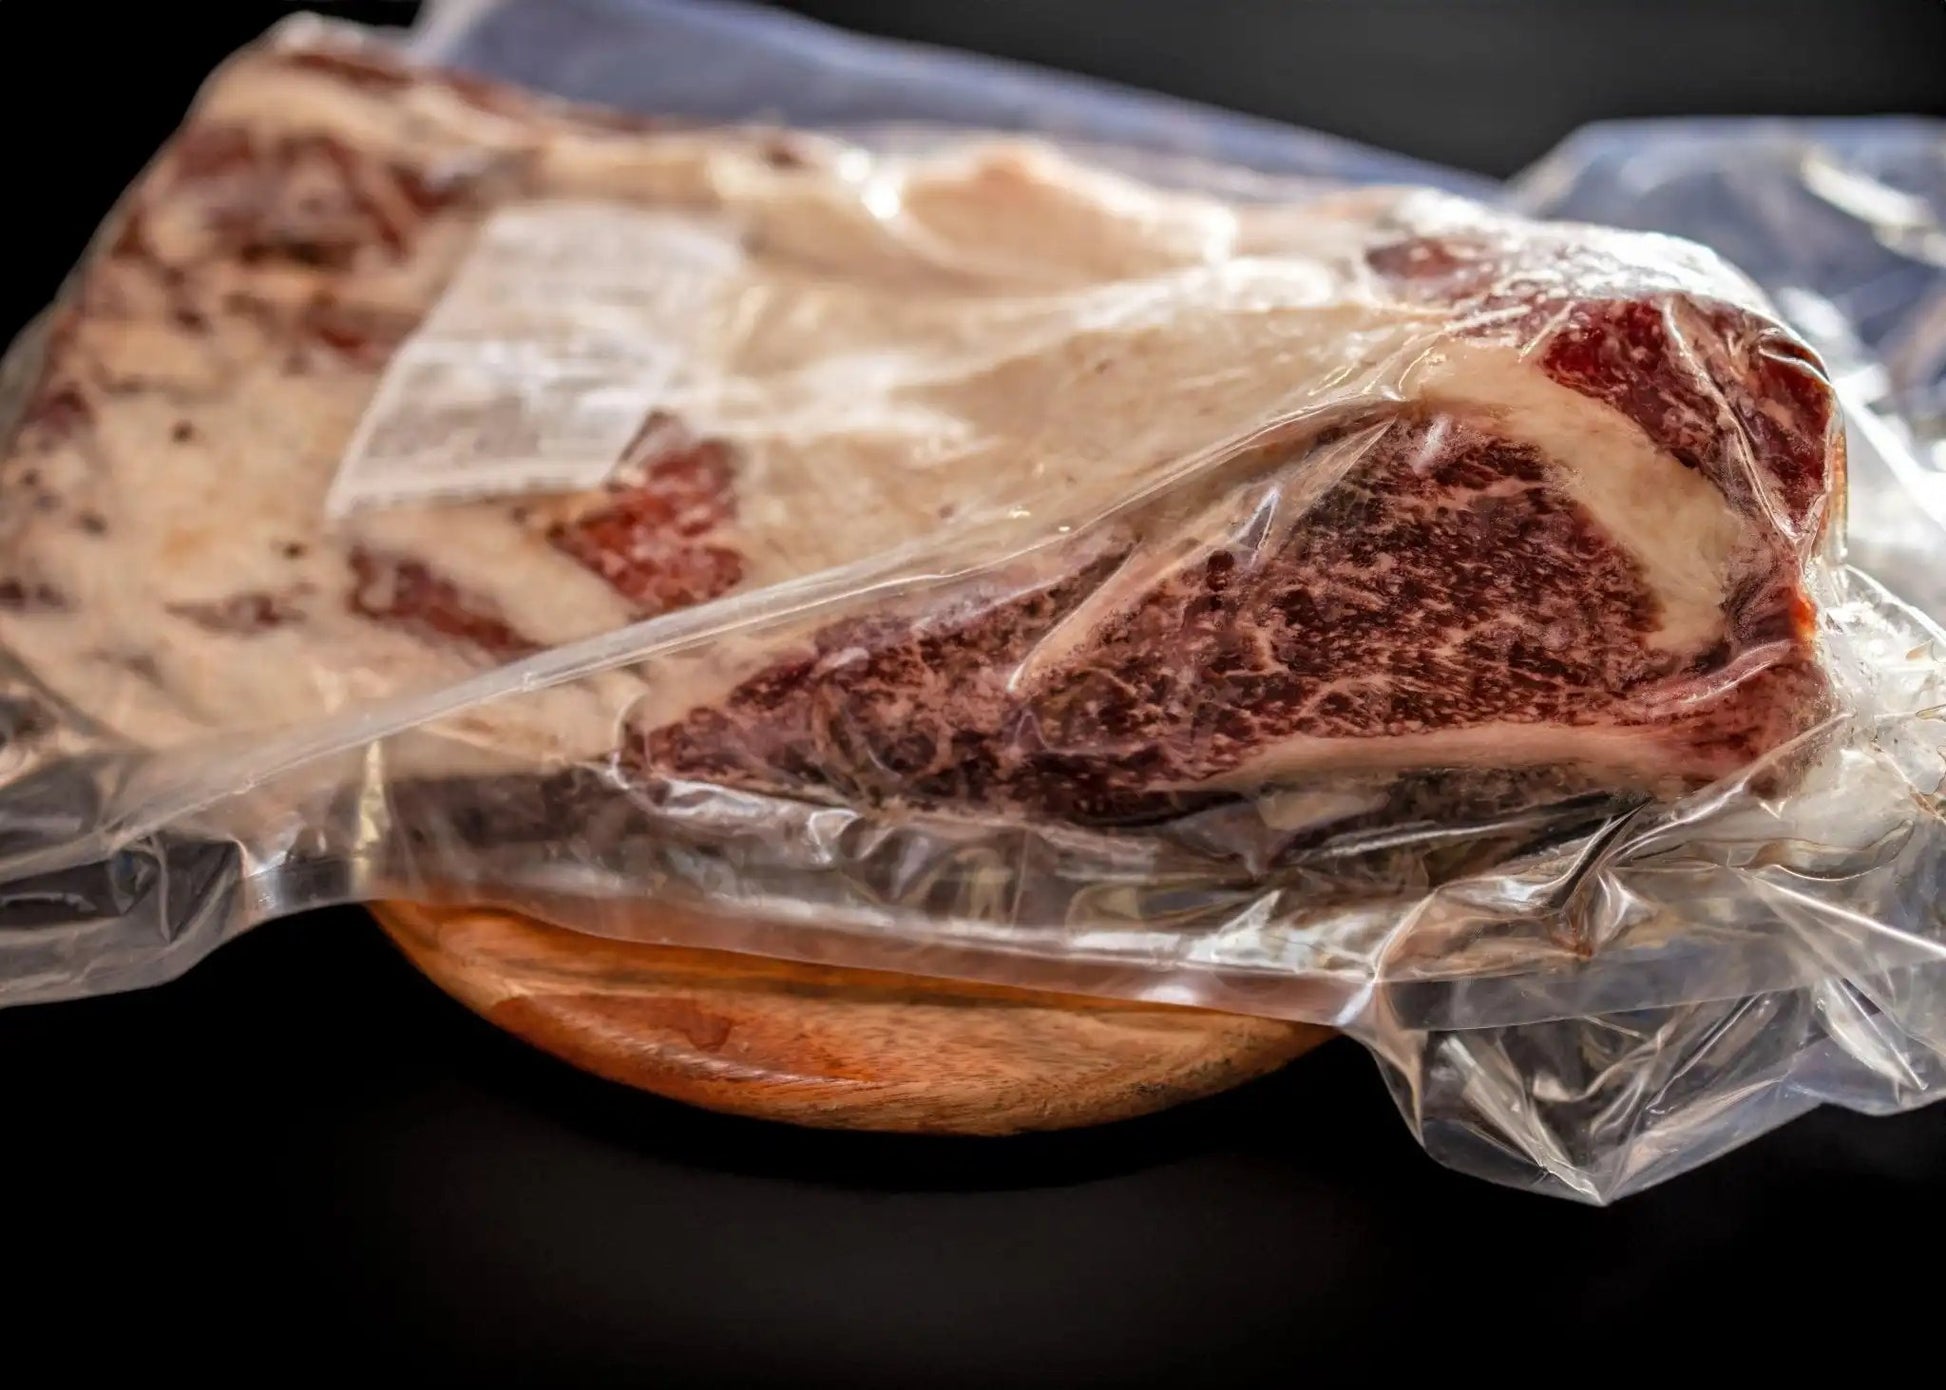 100% All-Natural Grass-Fed Pasture-Raised Wagyu Brisket - The Hufeisen-Ranch (WYO Wagyu)